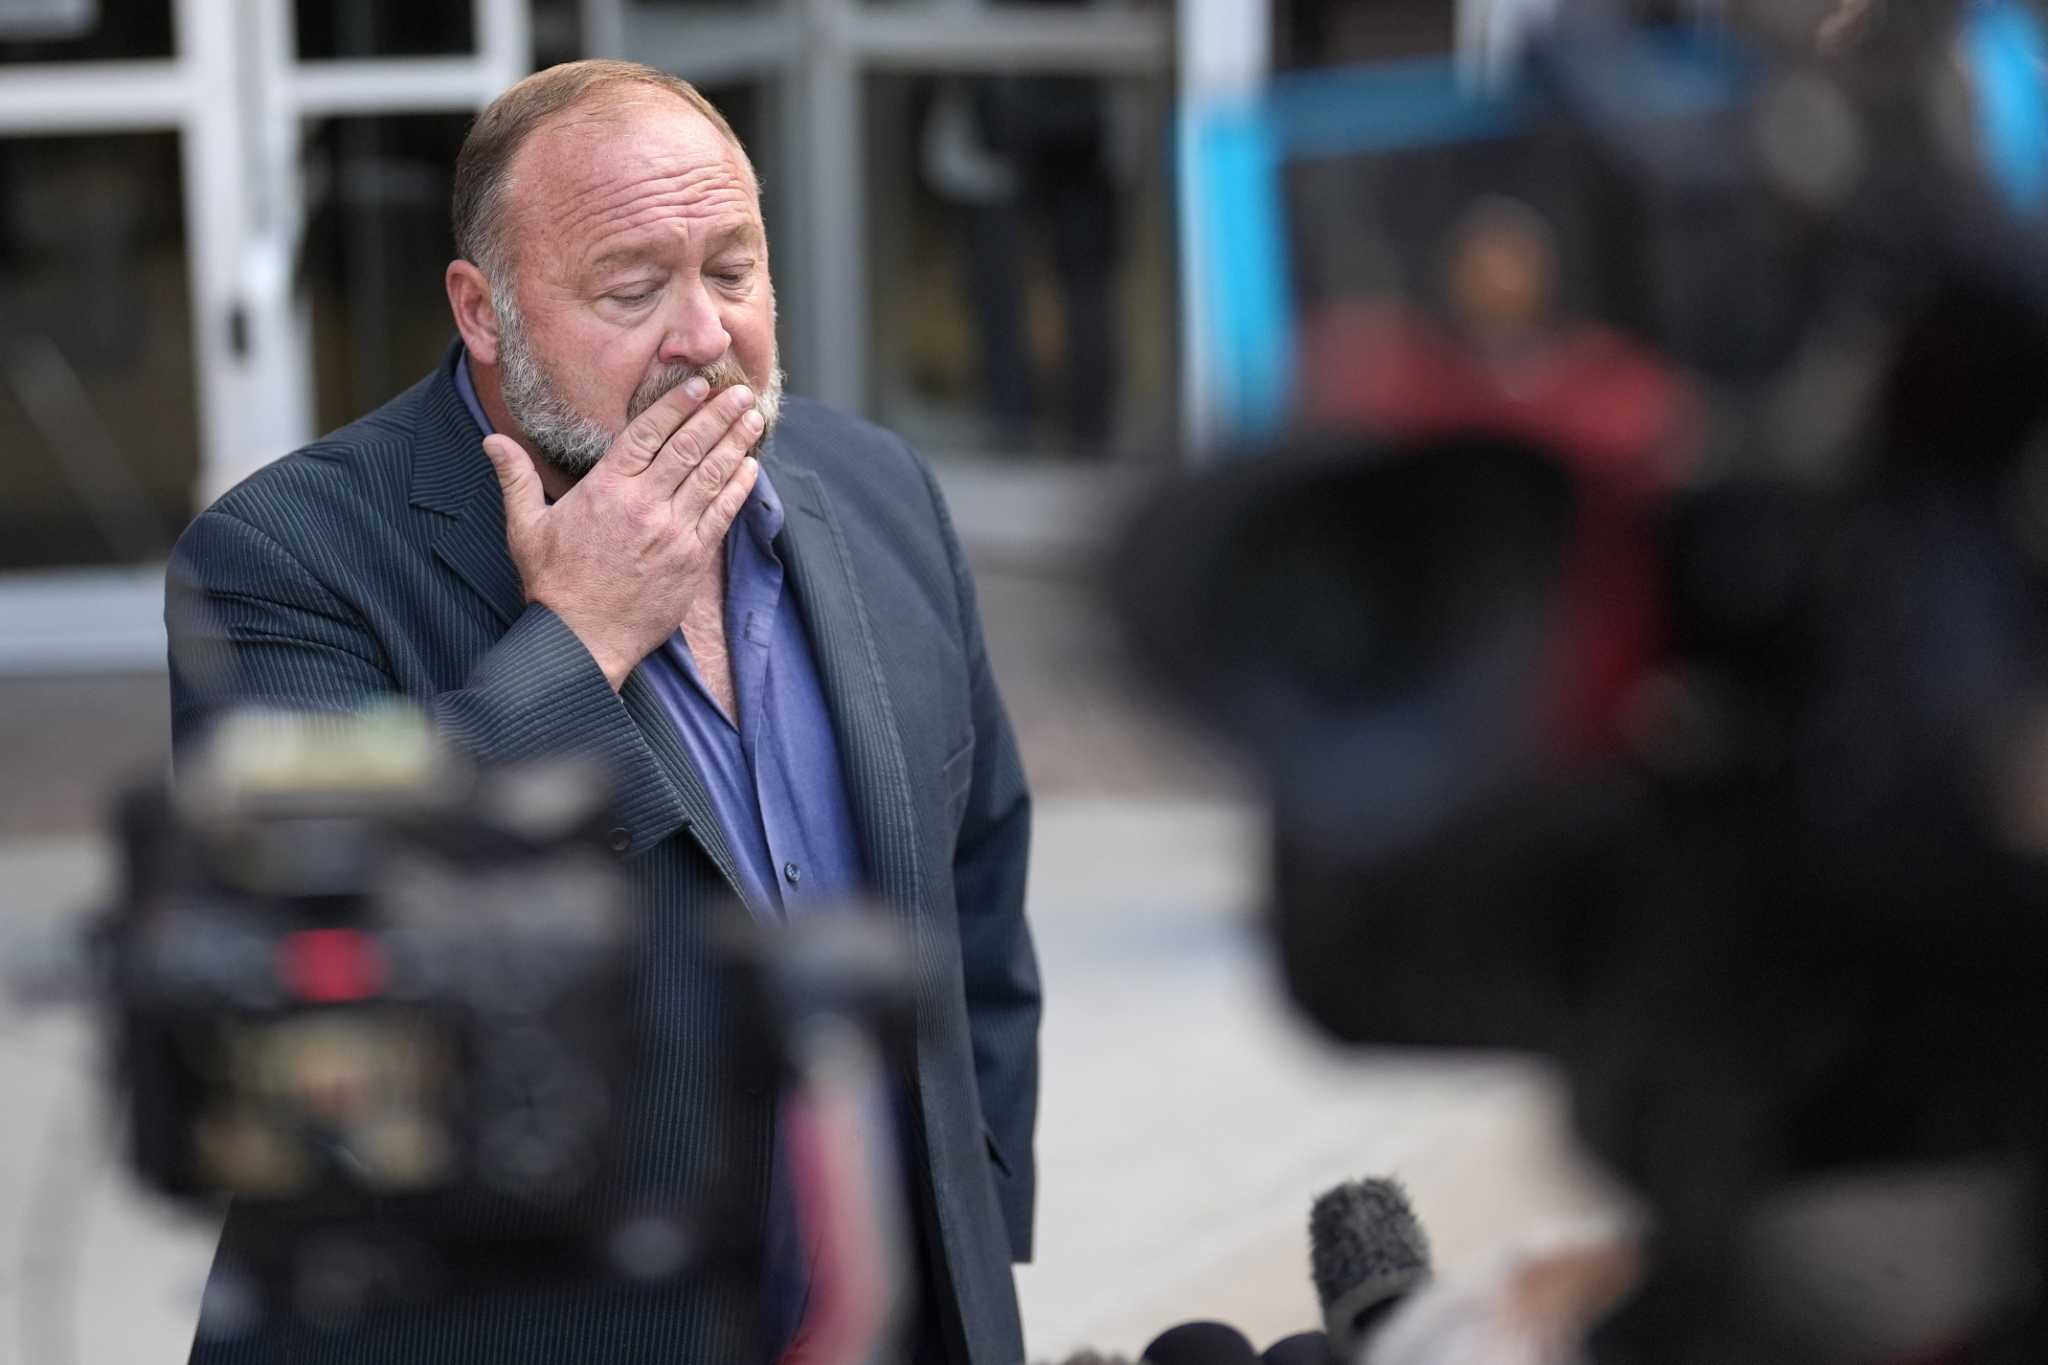 Alex Jones’ personal assets to be sold to pay $1.5B Sandy Hook debt. Company bankruptcy is dismissed